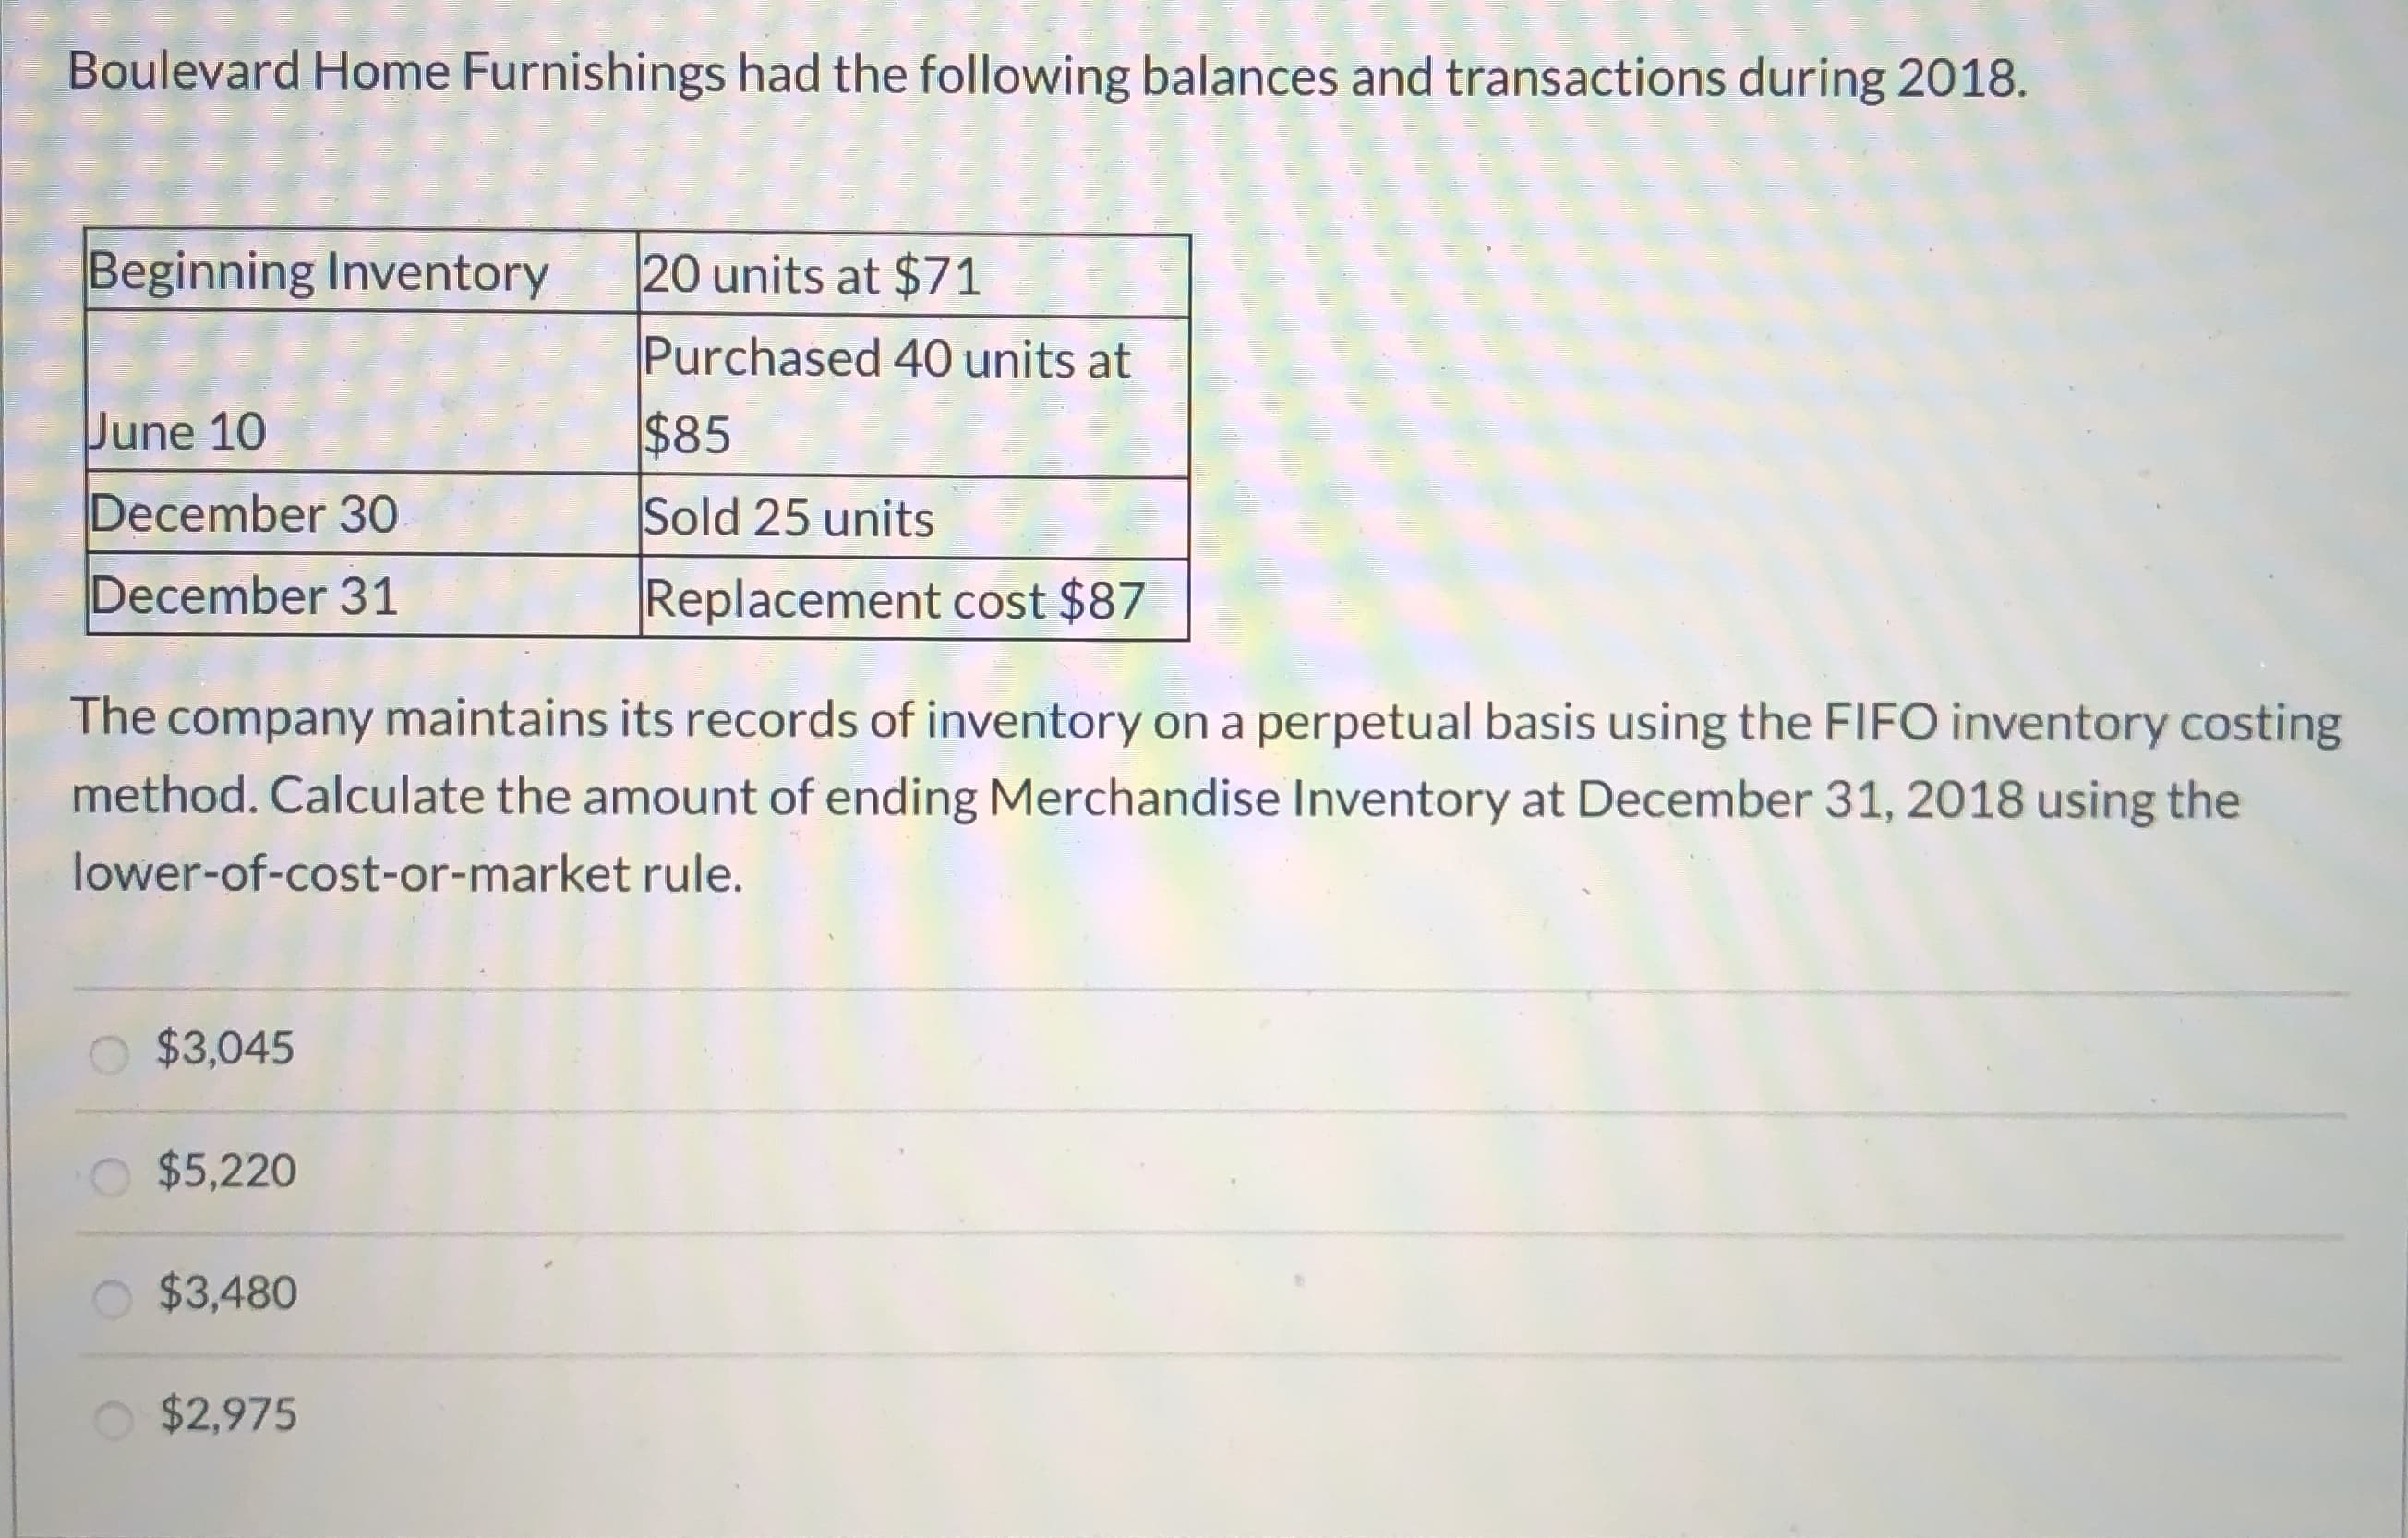 Boulevard Home Furnishings had the following balances and transactions during 2018.
Beginning Inventory
20 units at $71
Purchased 40 units at
June 10
$85
December 30
Sold 25 units
December 31
Replacement cost $87
The company maintains its records of inventory on a perpetual basis using the FIFO inventory costing
method. Calculate the amount of ending Merchandise Inventory at December 31, 2018 using the
lower-of-cost-or-market rule.
